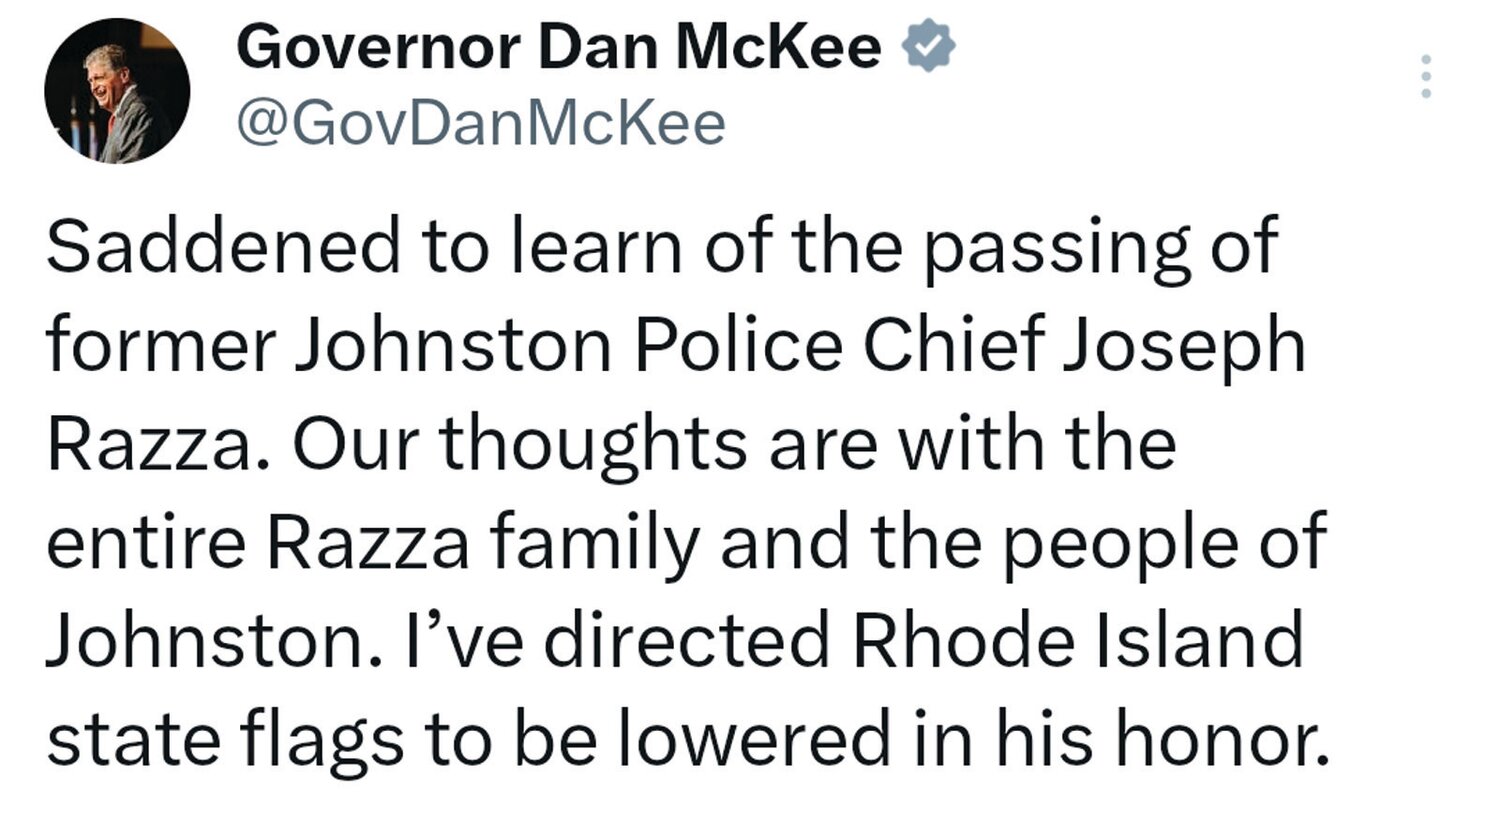 CONDOLENCES FROM THE GOVERNOR: “Saddened to learn of the passing of former Johnston Police Chief Joseph Razza,” Rhode Island Gov. Dan McKee posted online Friday. “Our thoughts are with the entire Razza family and the people of Johnston. I’ve directed Rhode Island state flags to be lowered in his honor.”